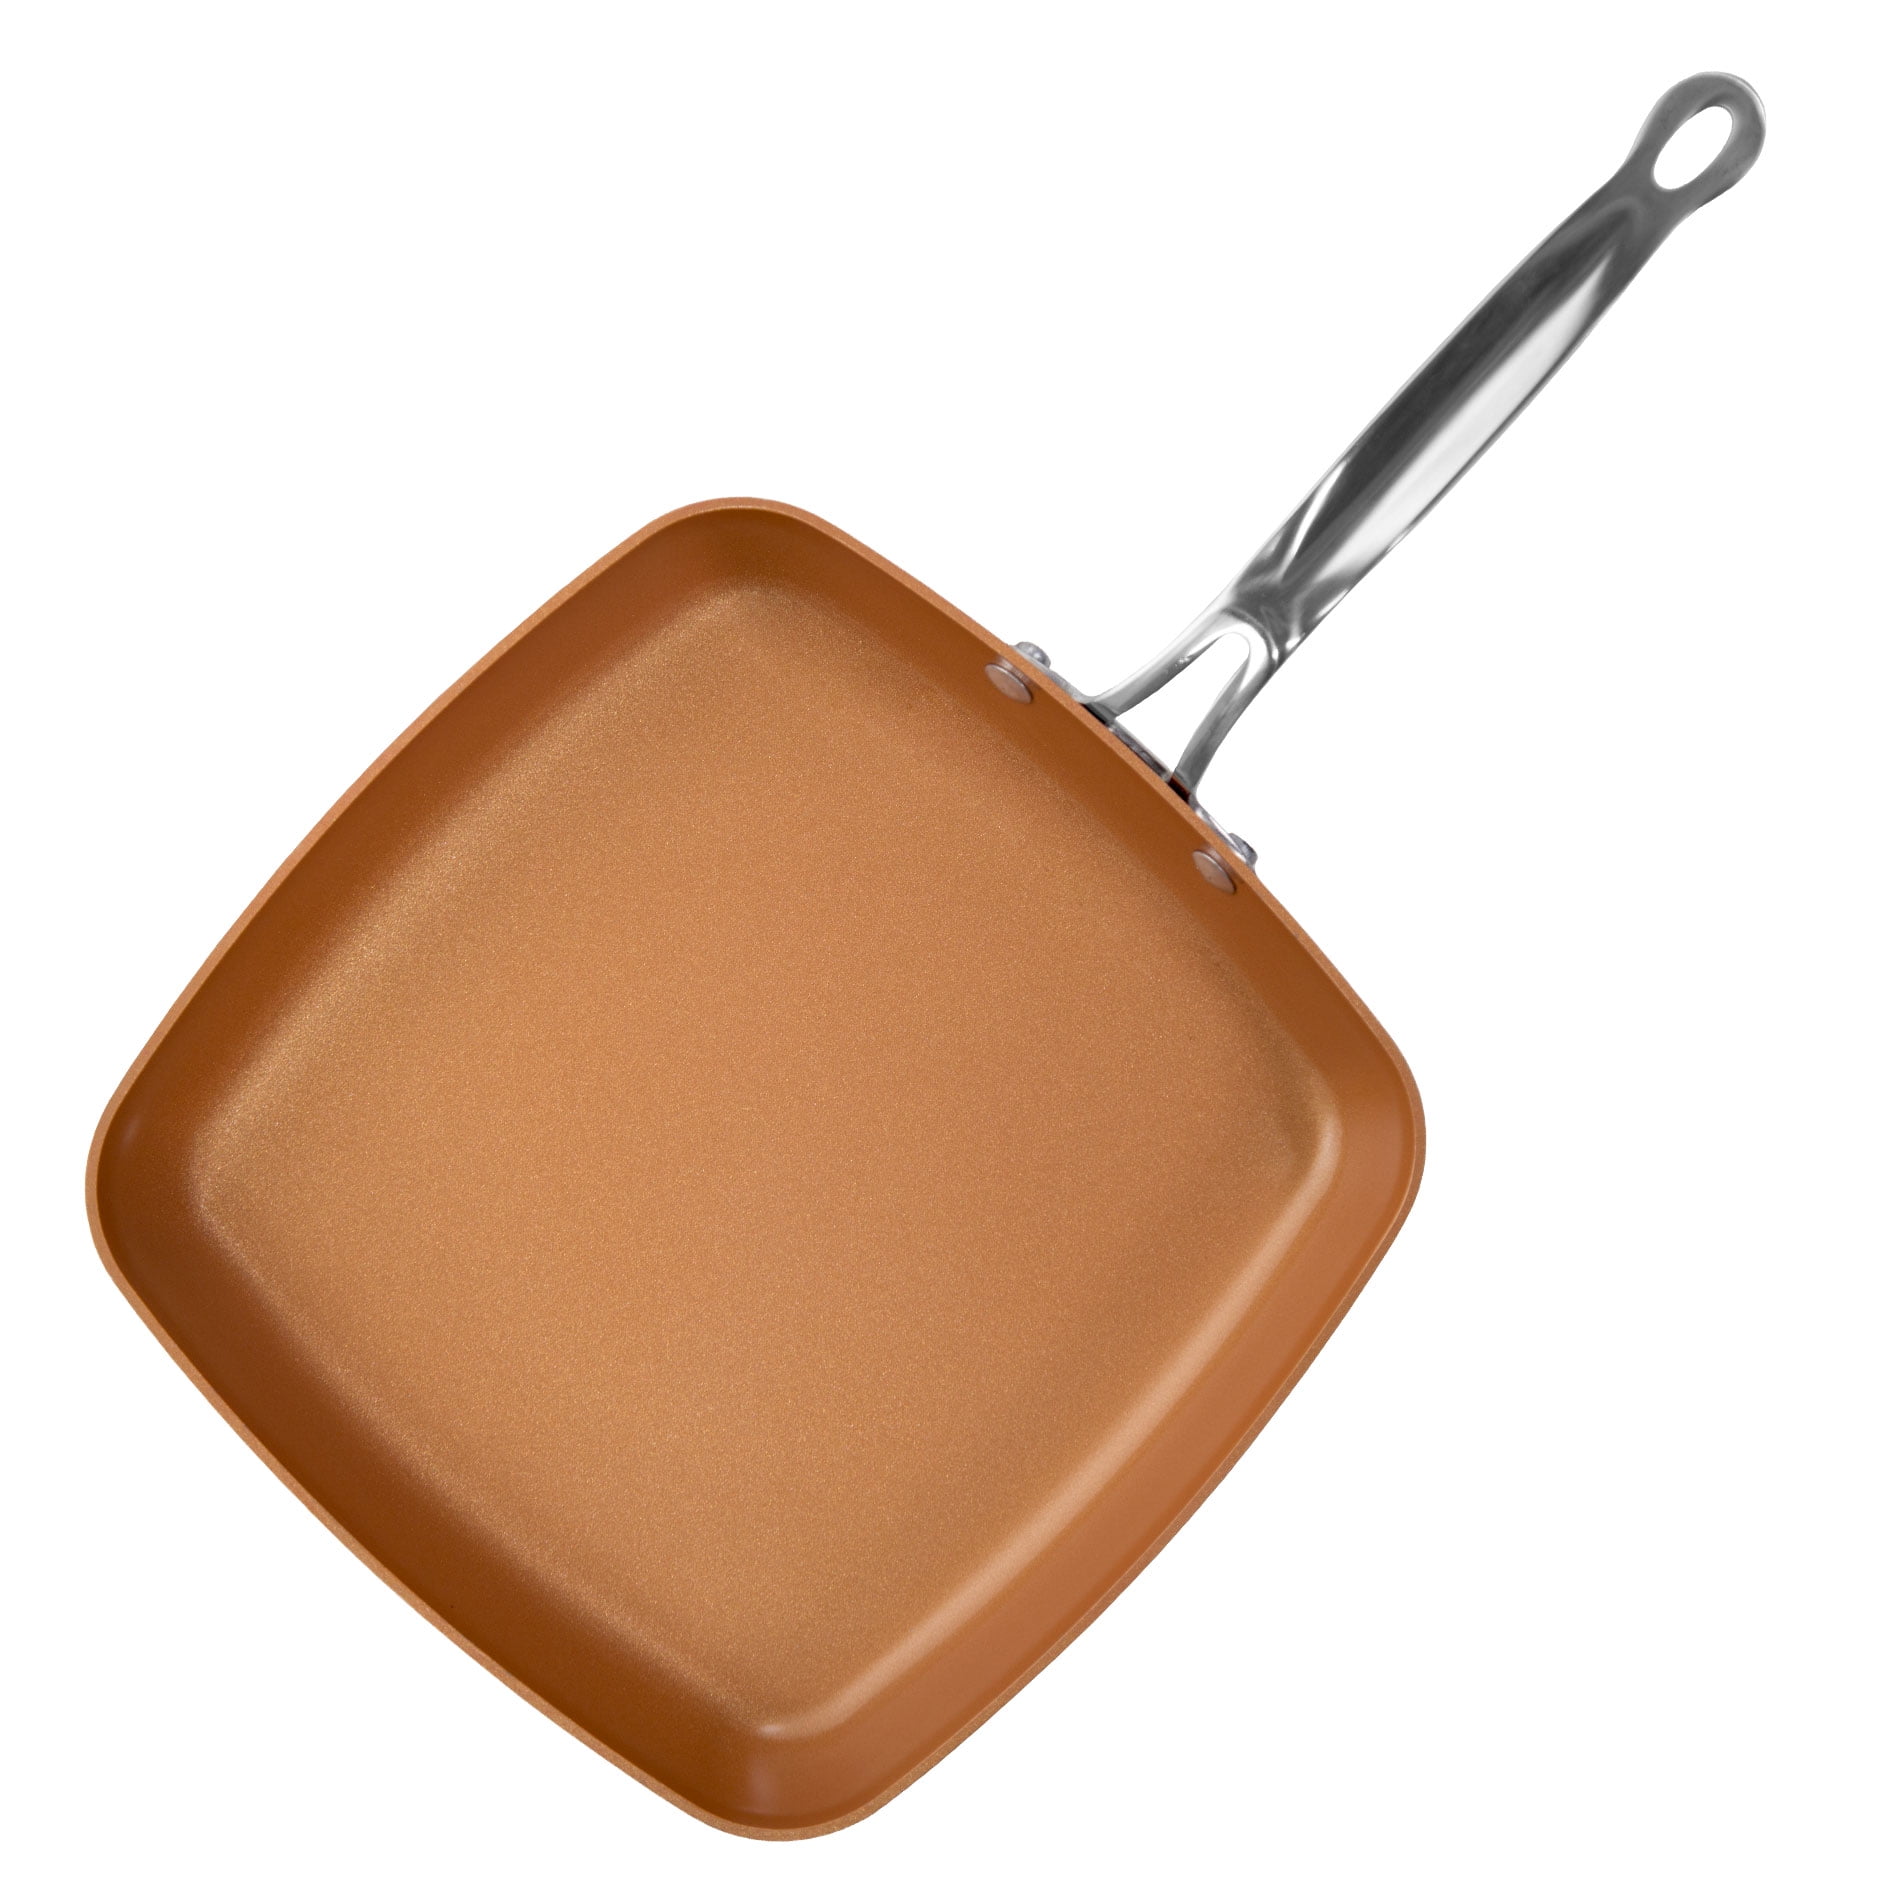  BulbHead Red Copper Square Pan 5 Piece Set by BulbHead, 10-Inch  Pan, Glass Lid, Fry Basket, & More: Home & Kitchen